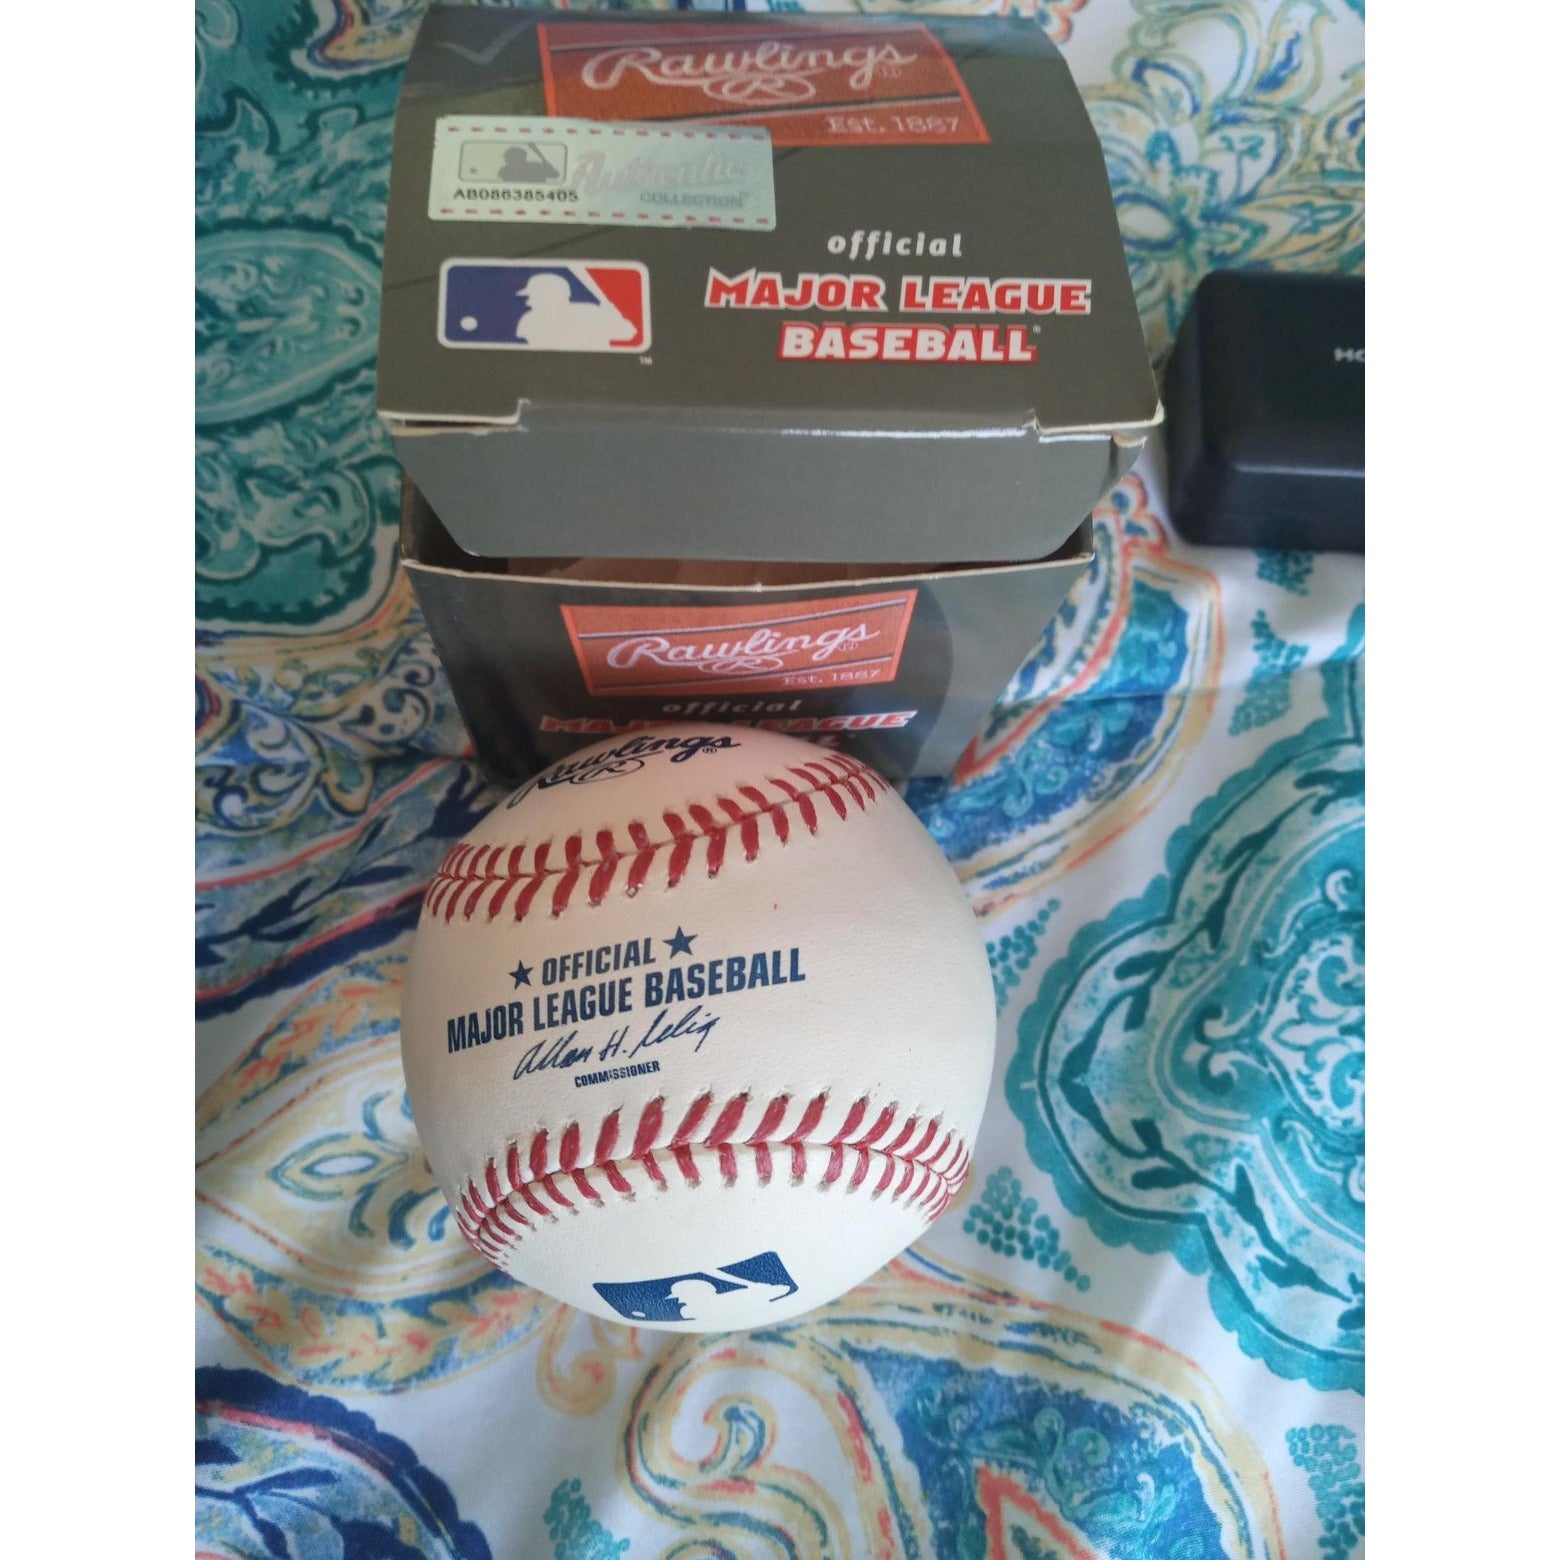 George Steinbrenner New York Yankees official MLB baseball signed with proof